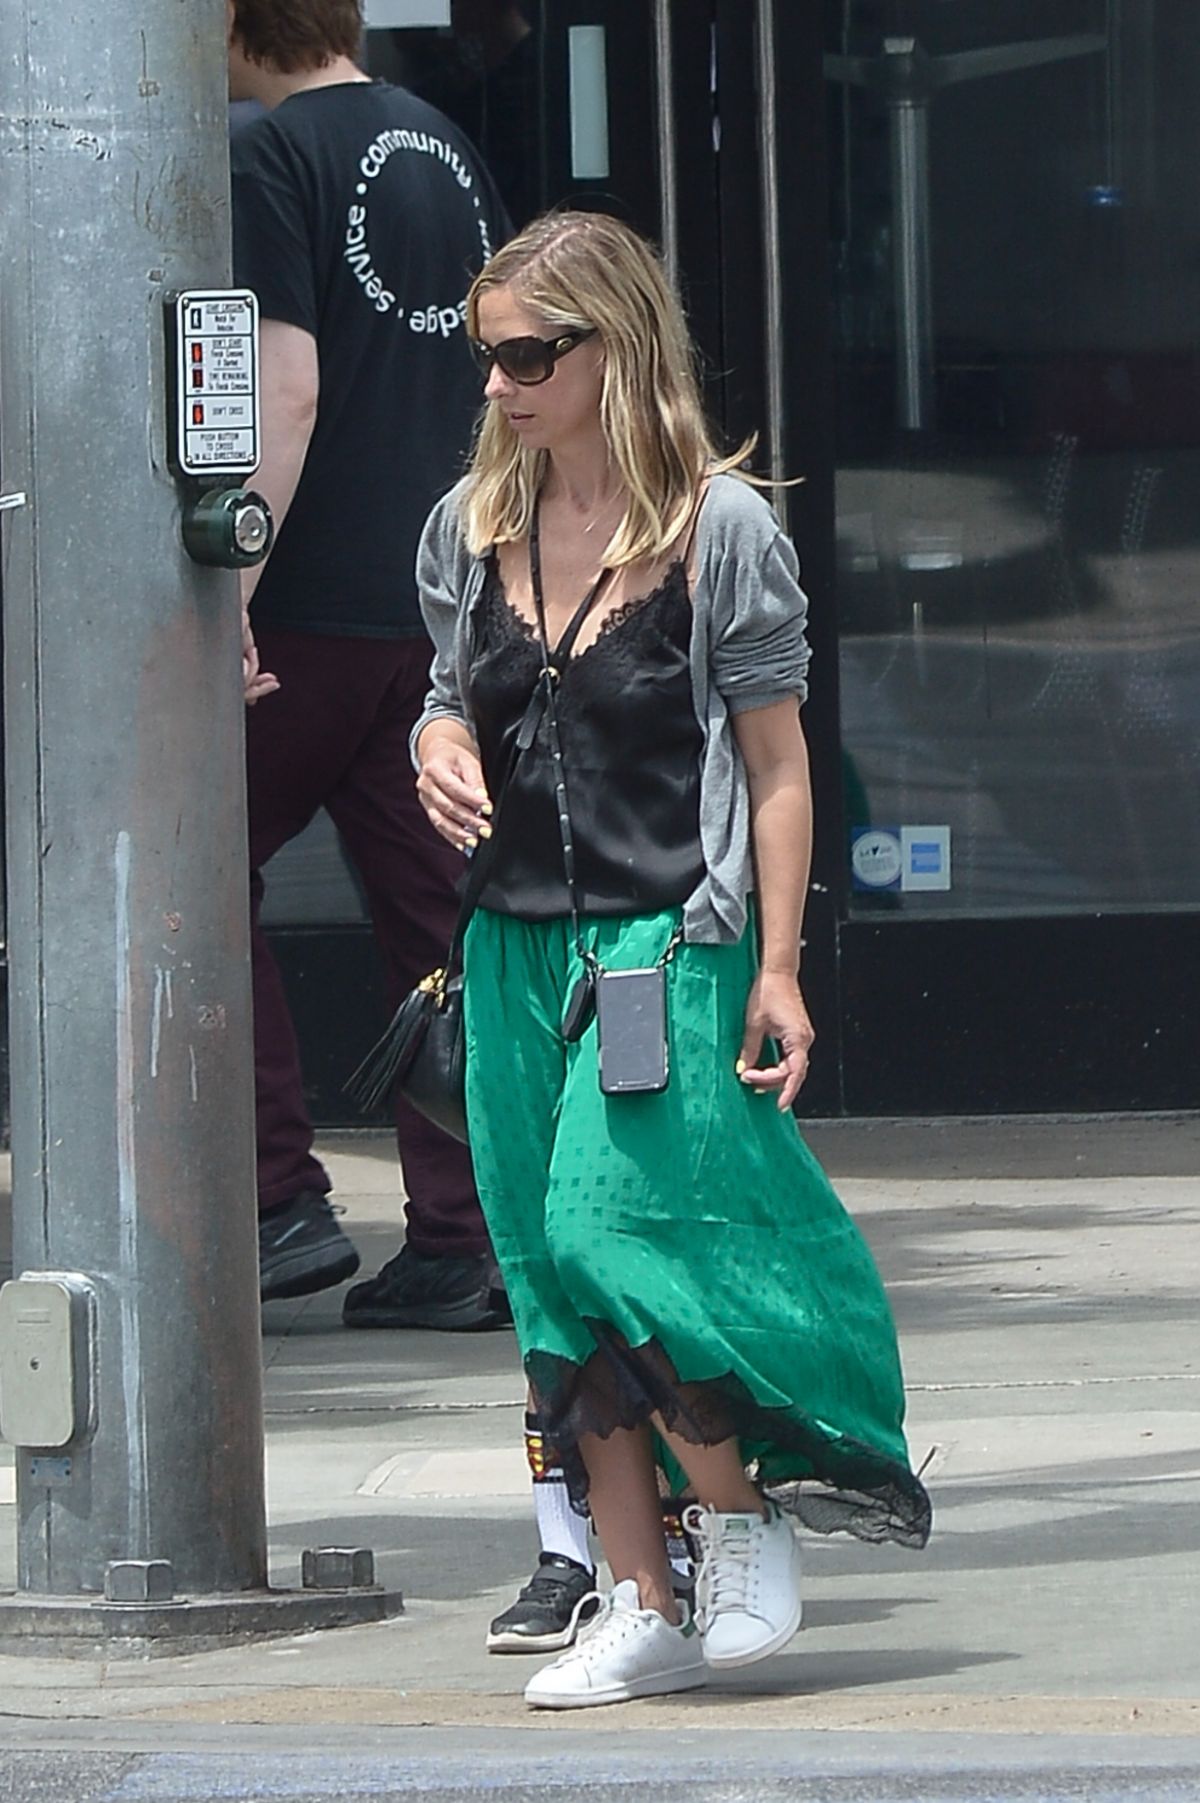 SARAH MICHELLE GELLAR Out Shopping in Los Angeles 06/13/2019 – HawtCelebs